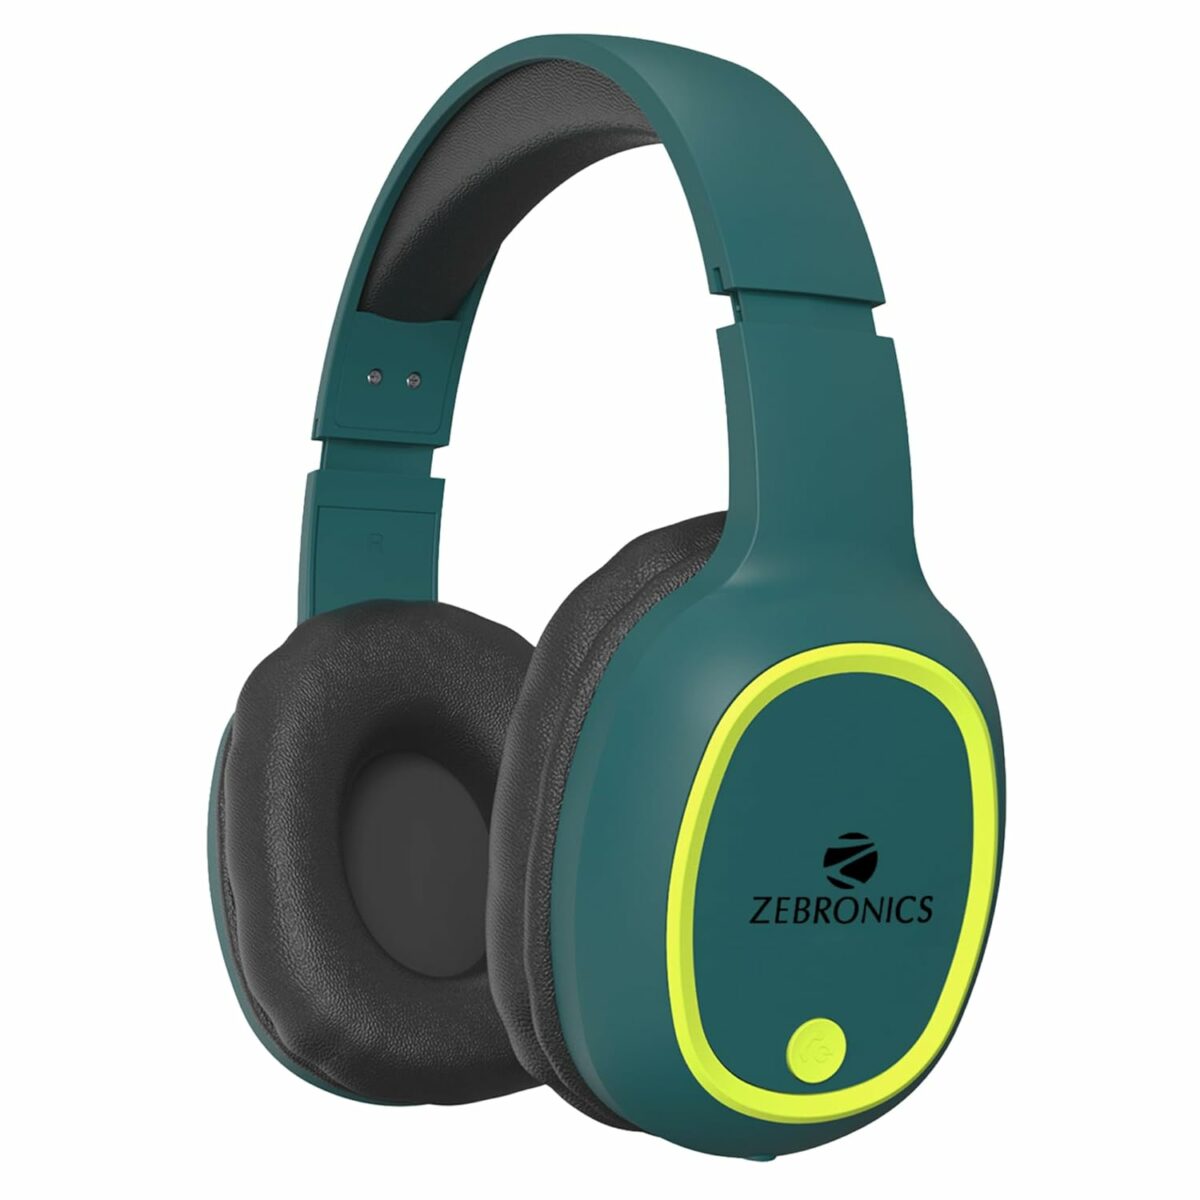 ZEBRONICS Thunder Bluetooth 5.3 Over ear Wireless Headphones with 60H Backup, Gaming Mode, Dual Pairing, ENC, AUX, Micro SD, Voice Assistant, Comfortable Earcups, Call Function(Teal Green)